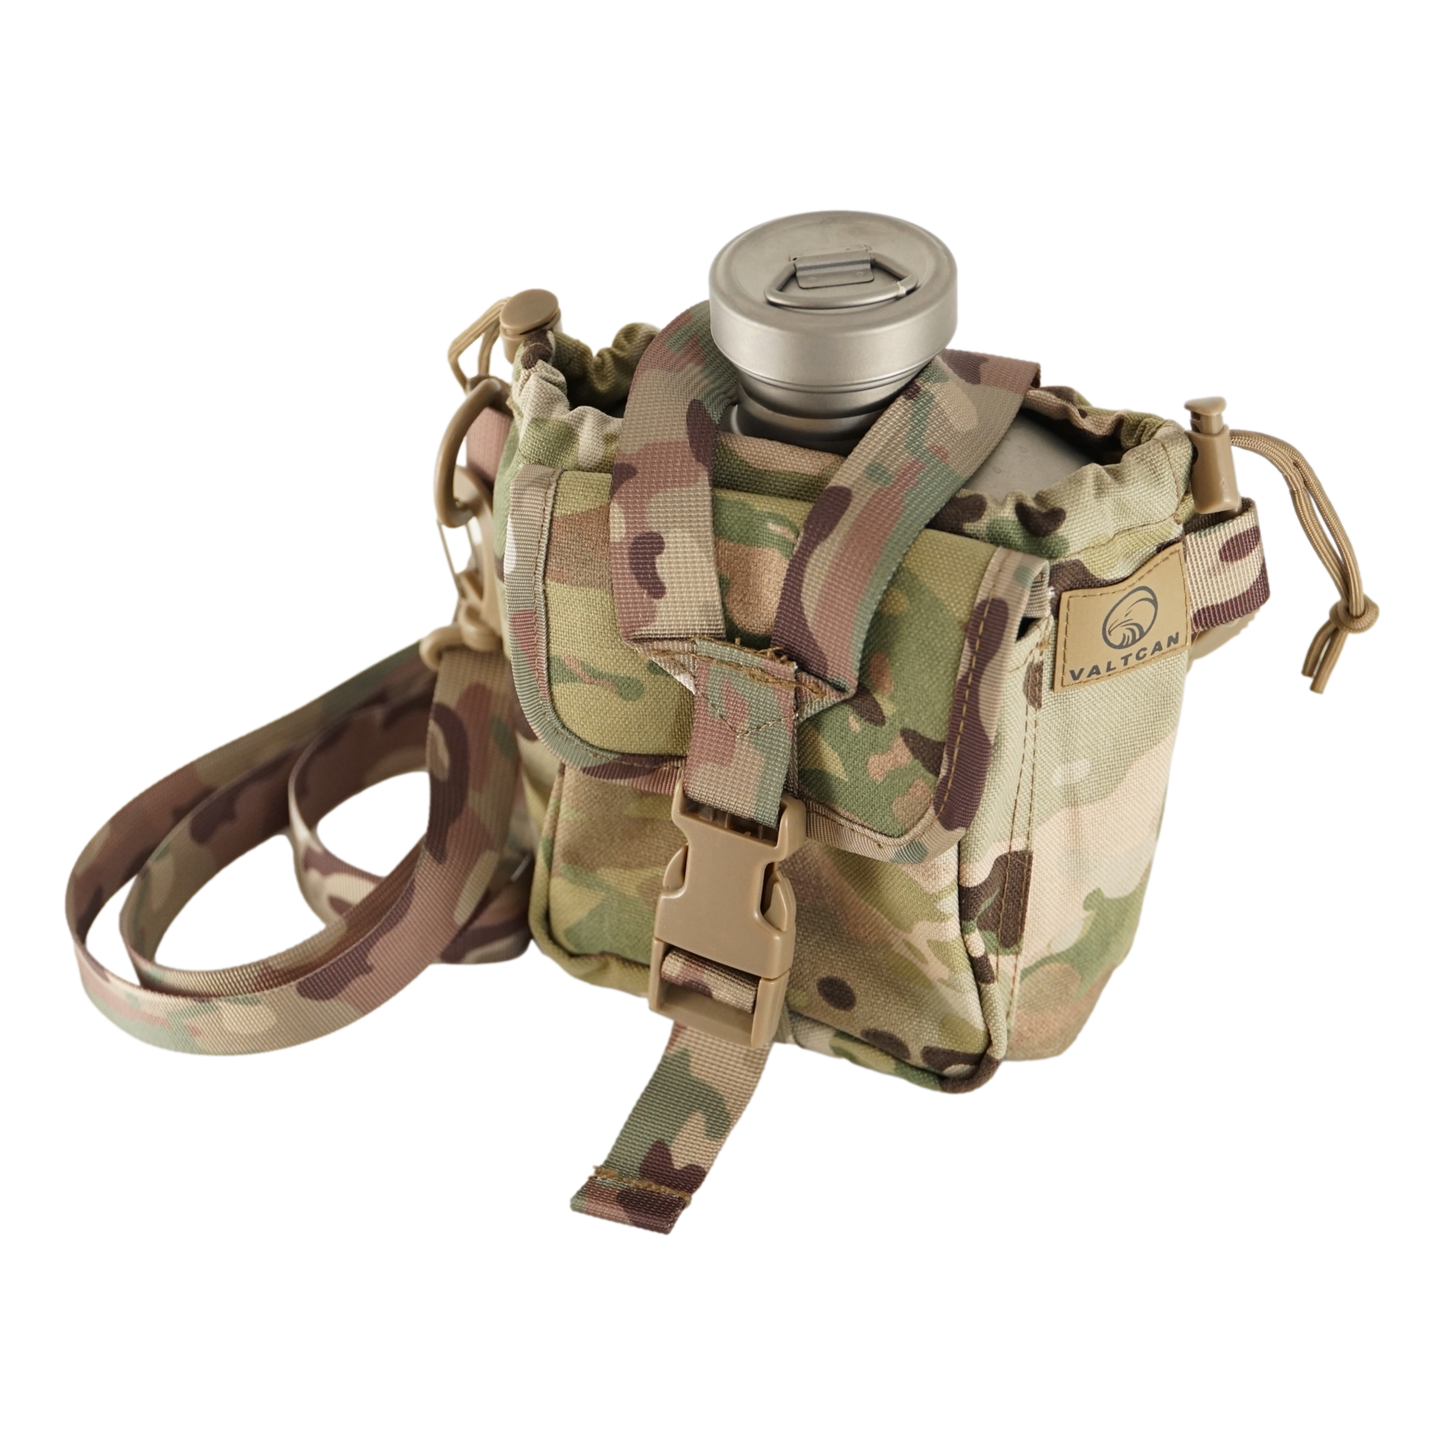 Valtcan Canteen Pouch Carrying Case Bag Multicam Classic Camo Cover Colorway for Titanium Canteen Set